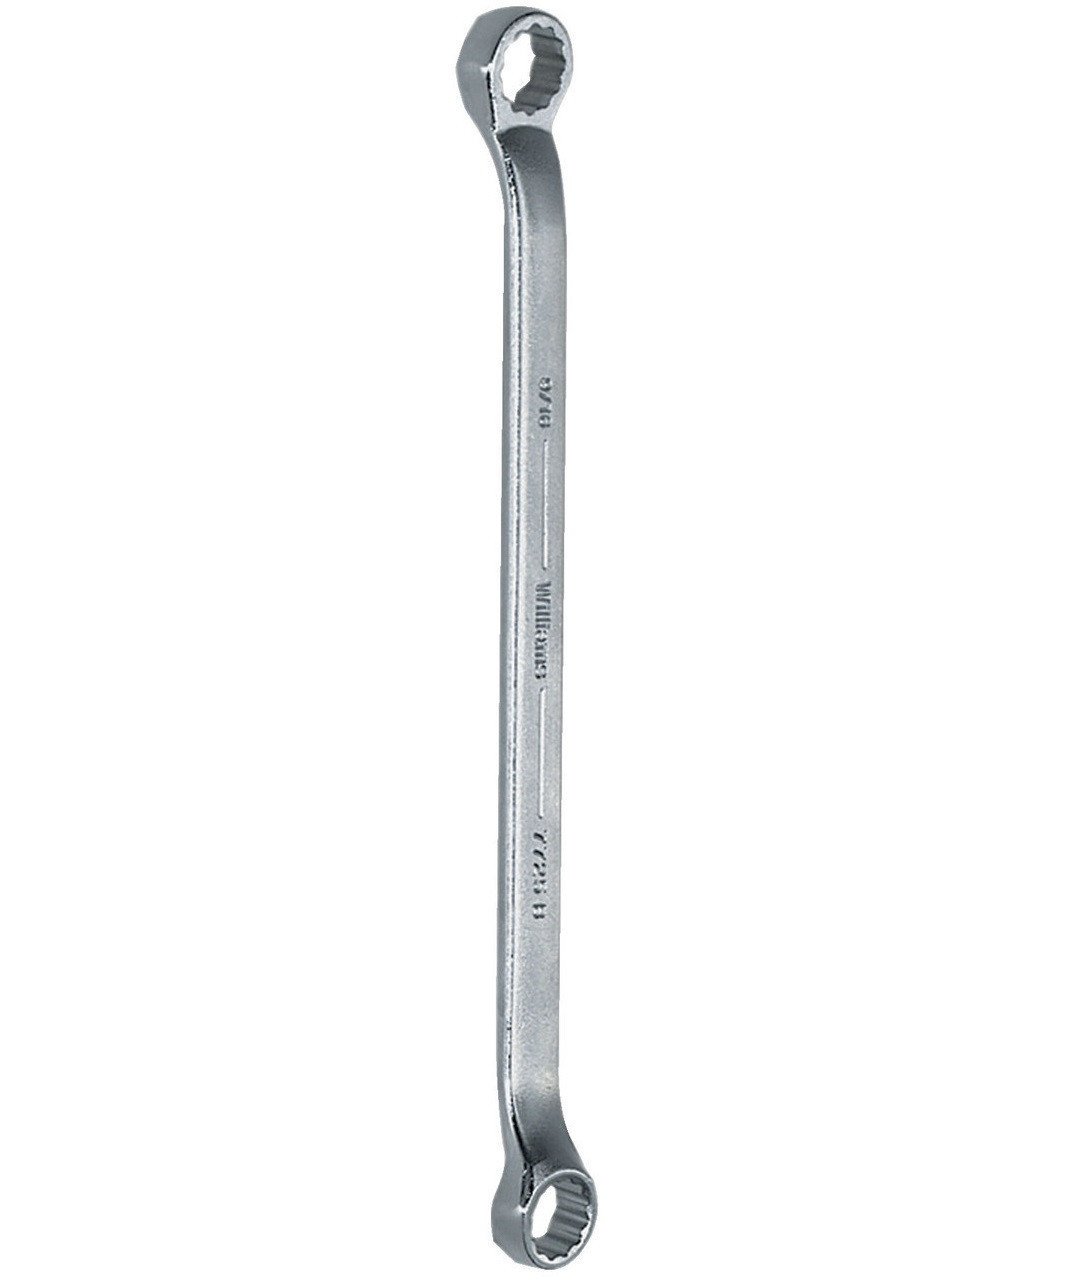 18x21MM Williams Satin Chrome Double Head 10 Degree Offset Box End Wrench 12 PT - JHWBWM-1821